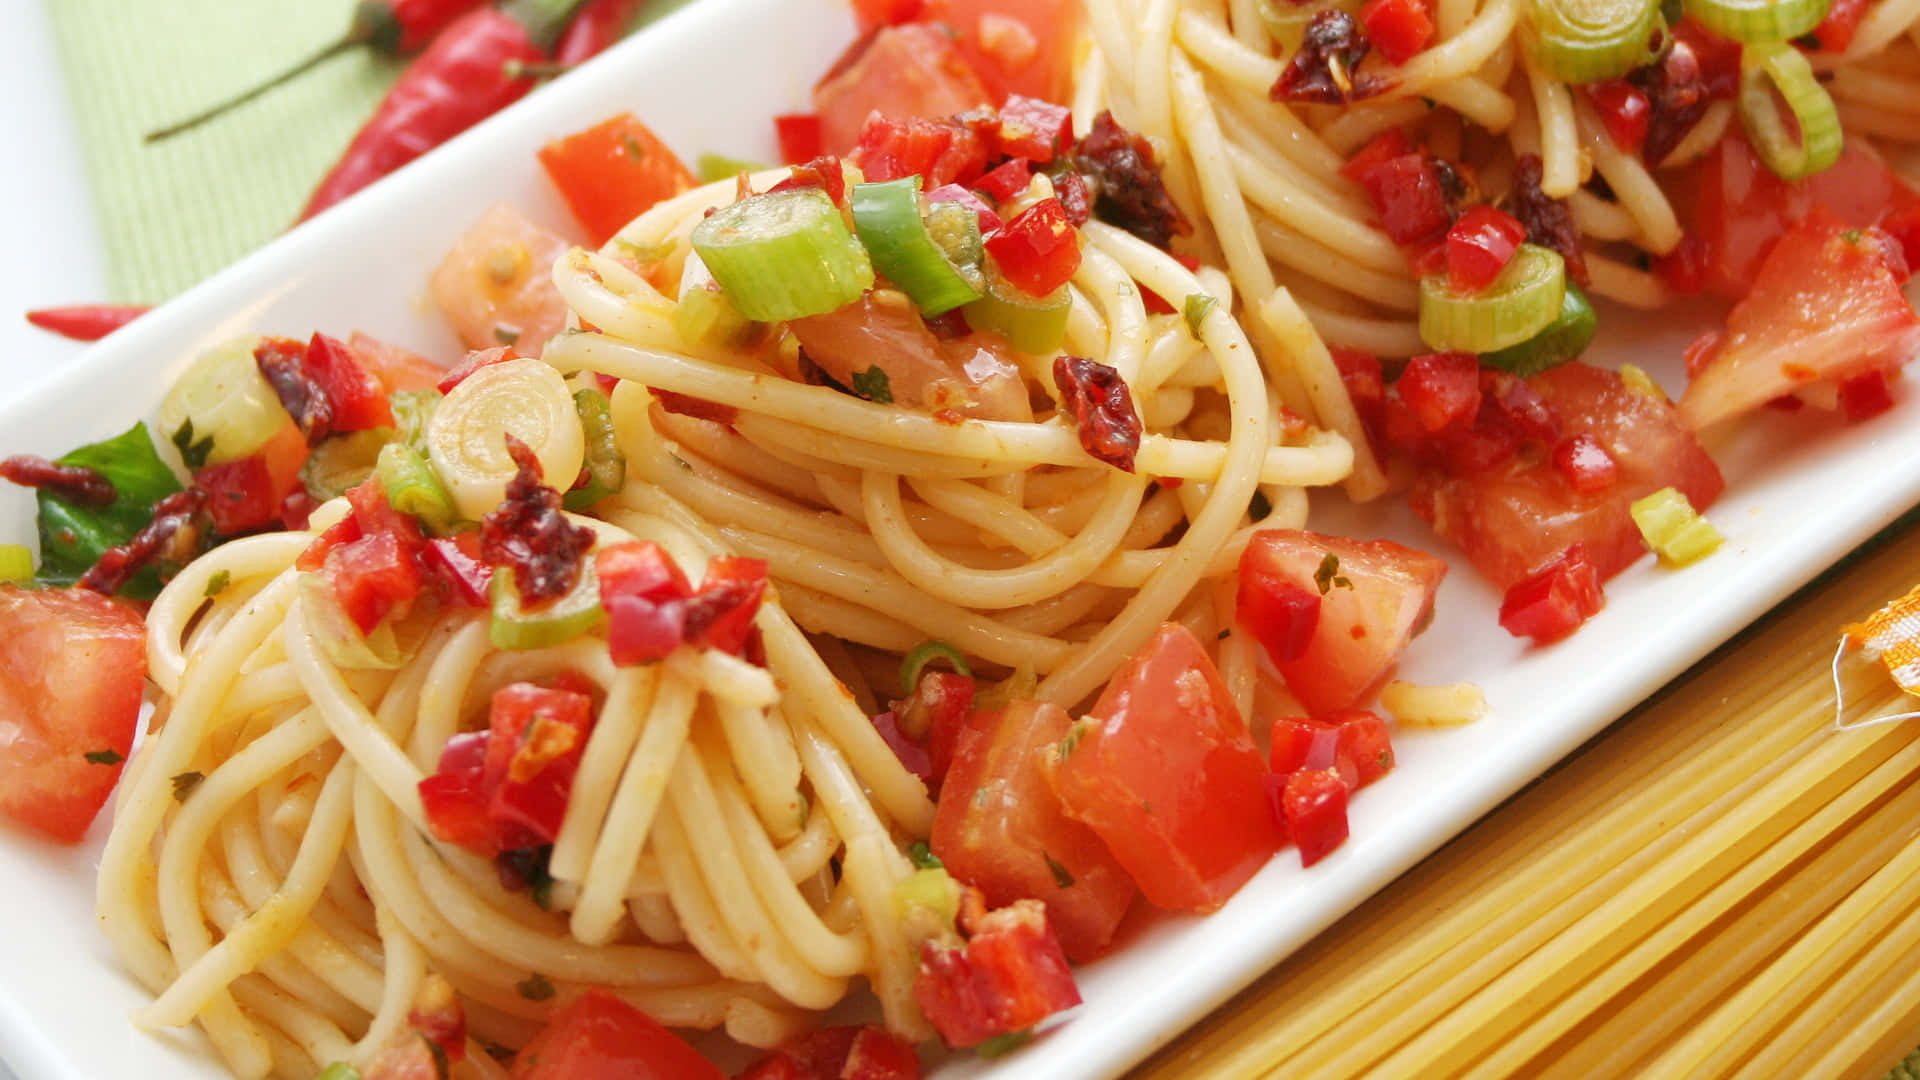 Spaghetti With Tomatoes And Peppers On A Plate